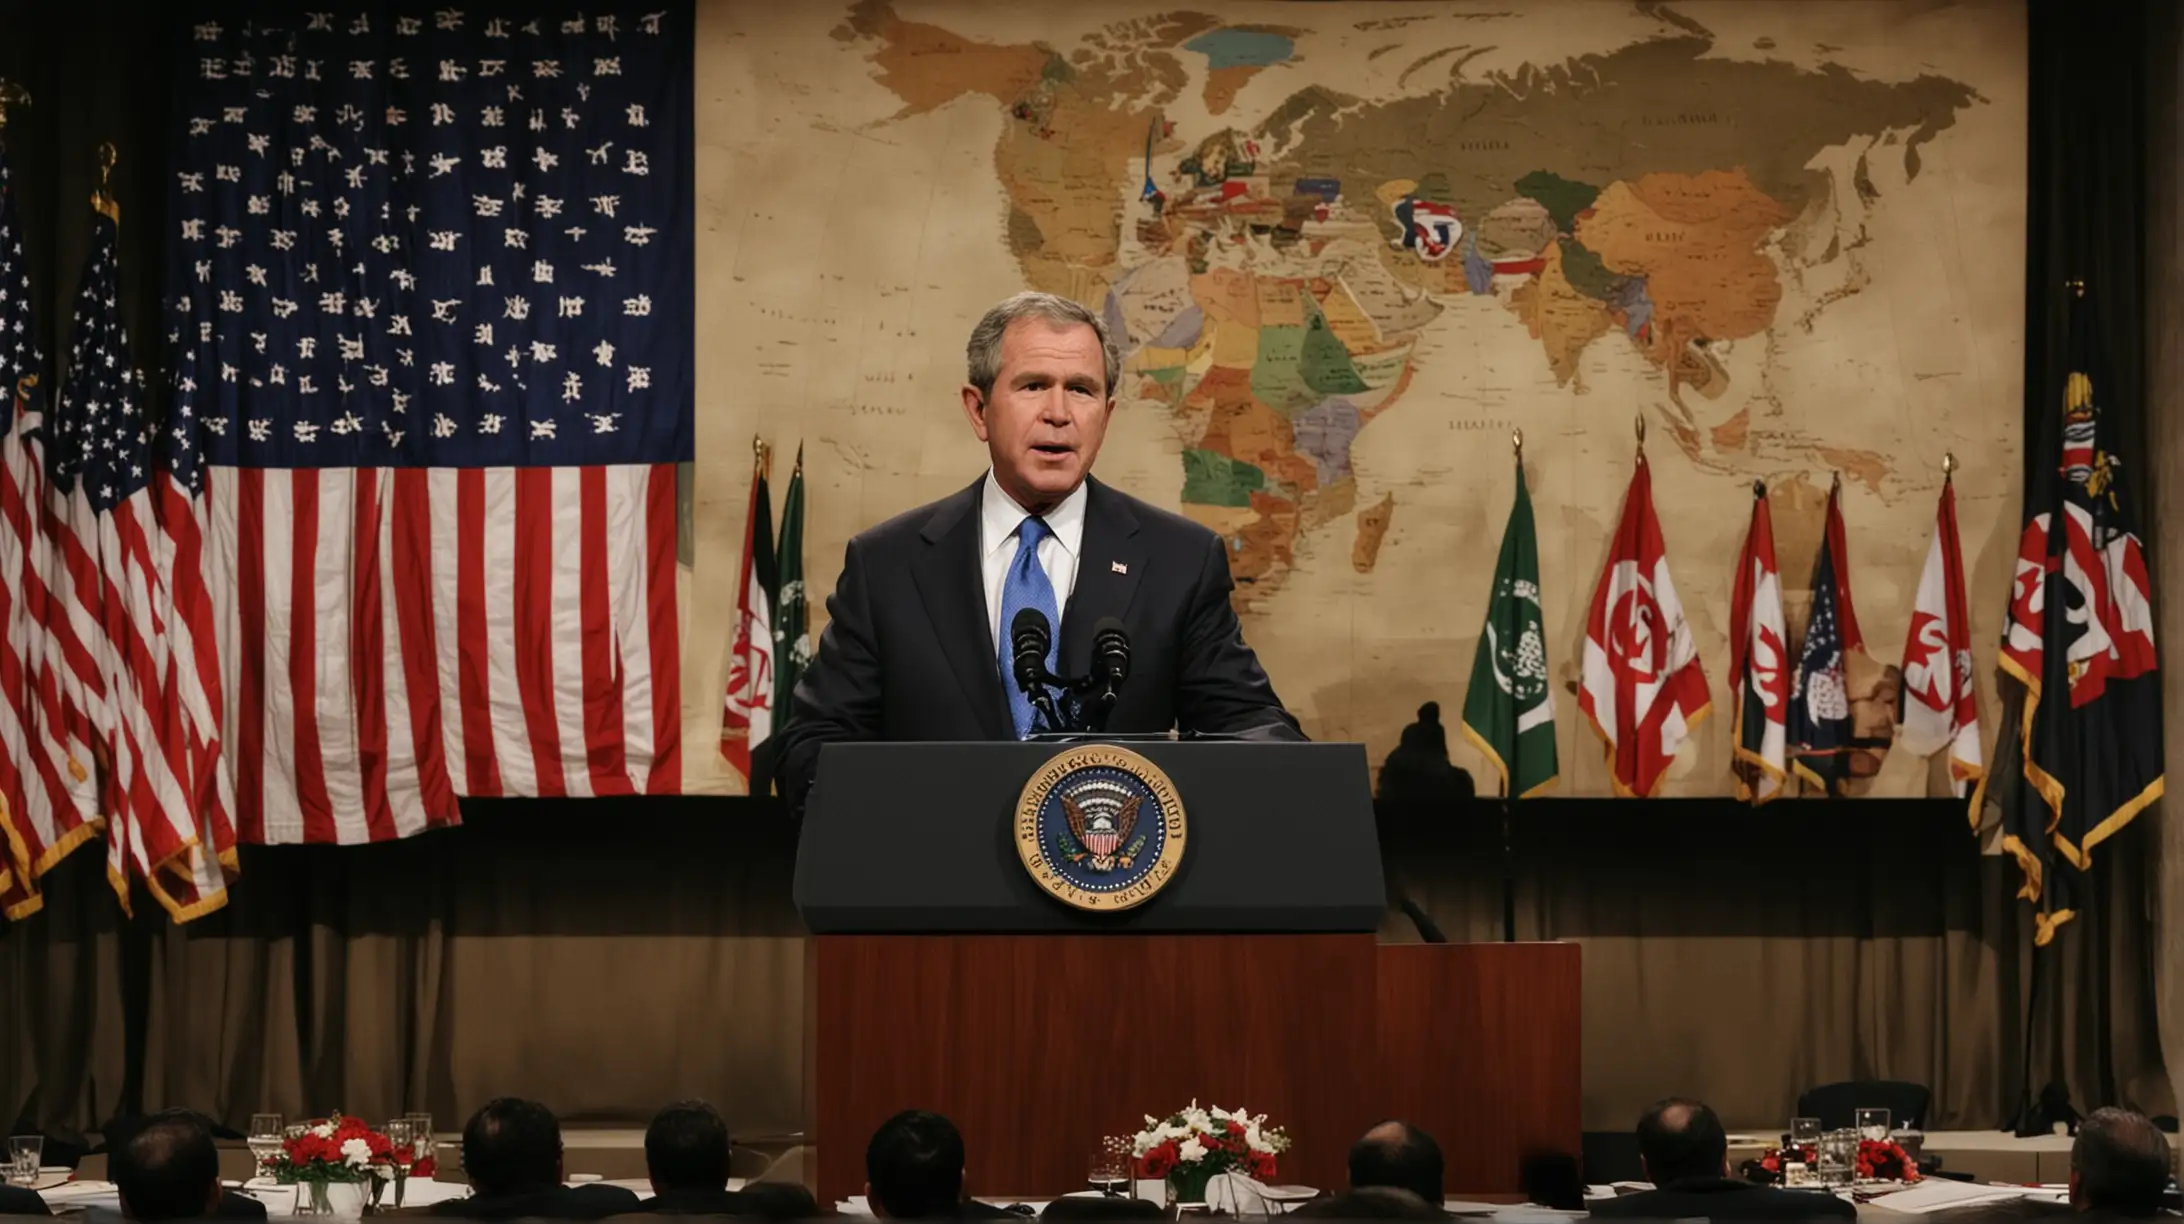 George W Bush Addresses Axis of Evil Threats with Patriotic Resolve